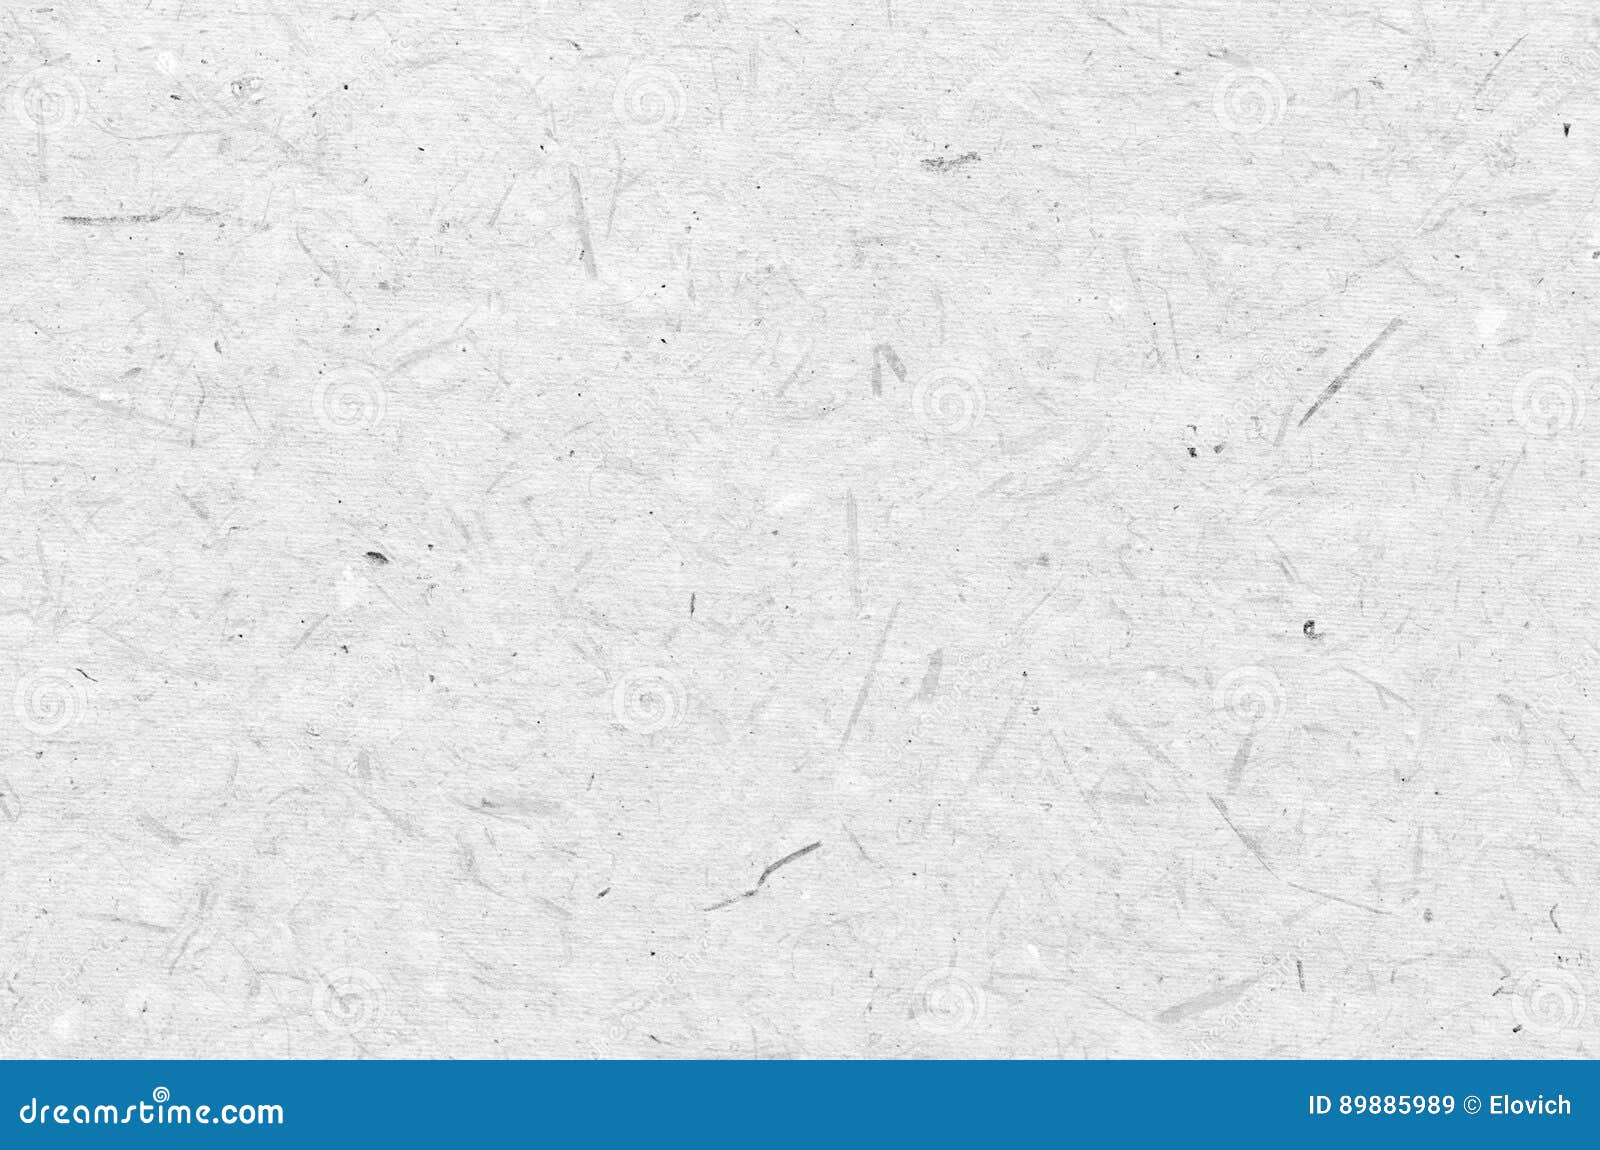 White craft paper texture stock image. Image of pattern - 89885989